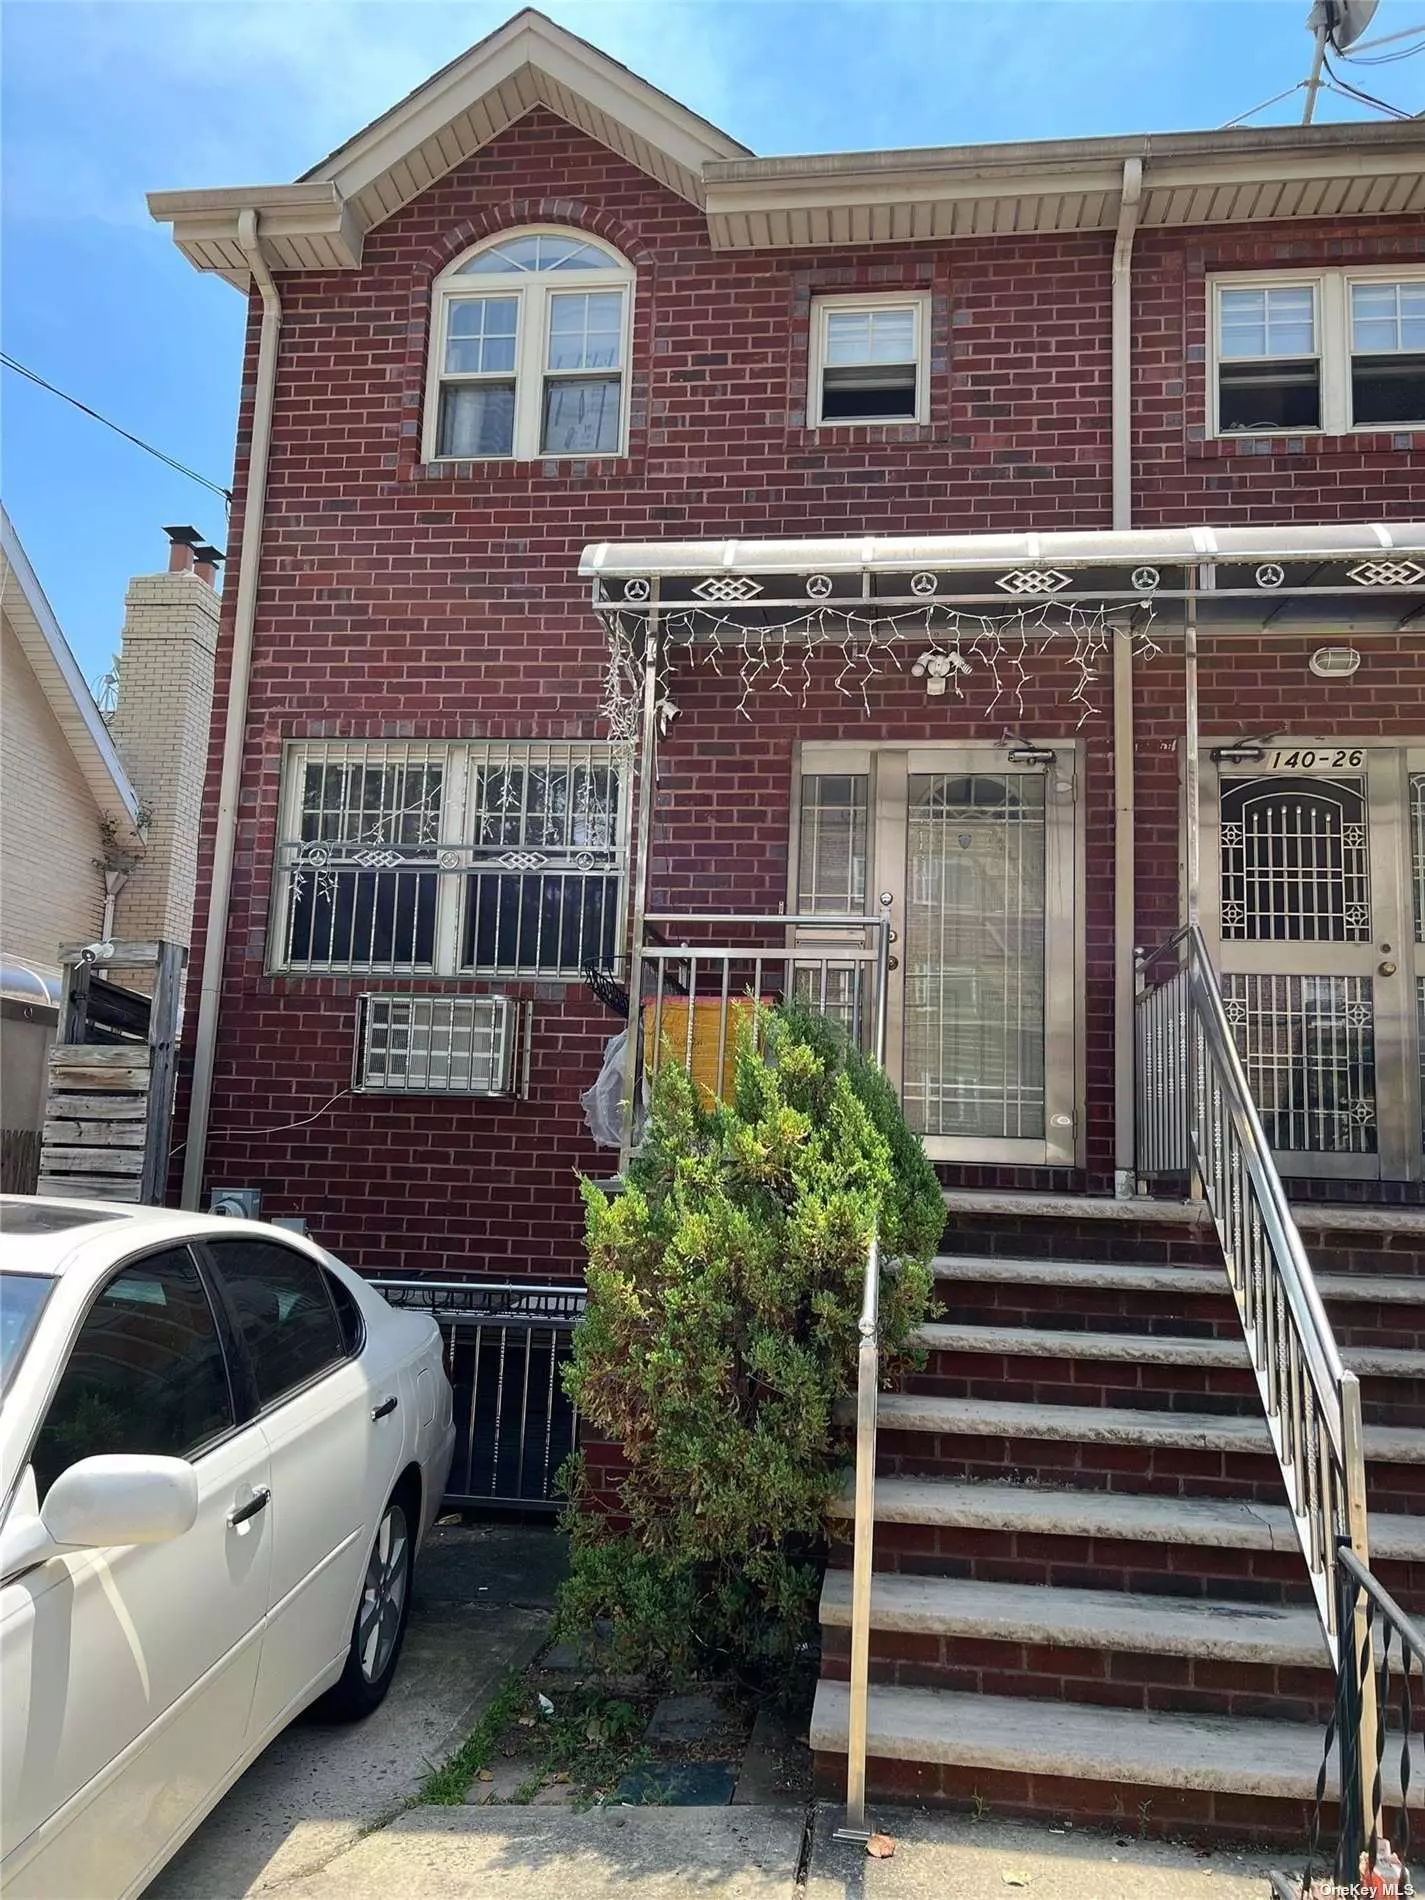 Prime Location in Flushing..End unit townhouse attached on one side. Whole house for rent. 2 master bedroom. 3 full baths.1 half bath, parking including, finished basement for family area .laundry in unit, backyard. close to everything.